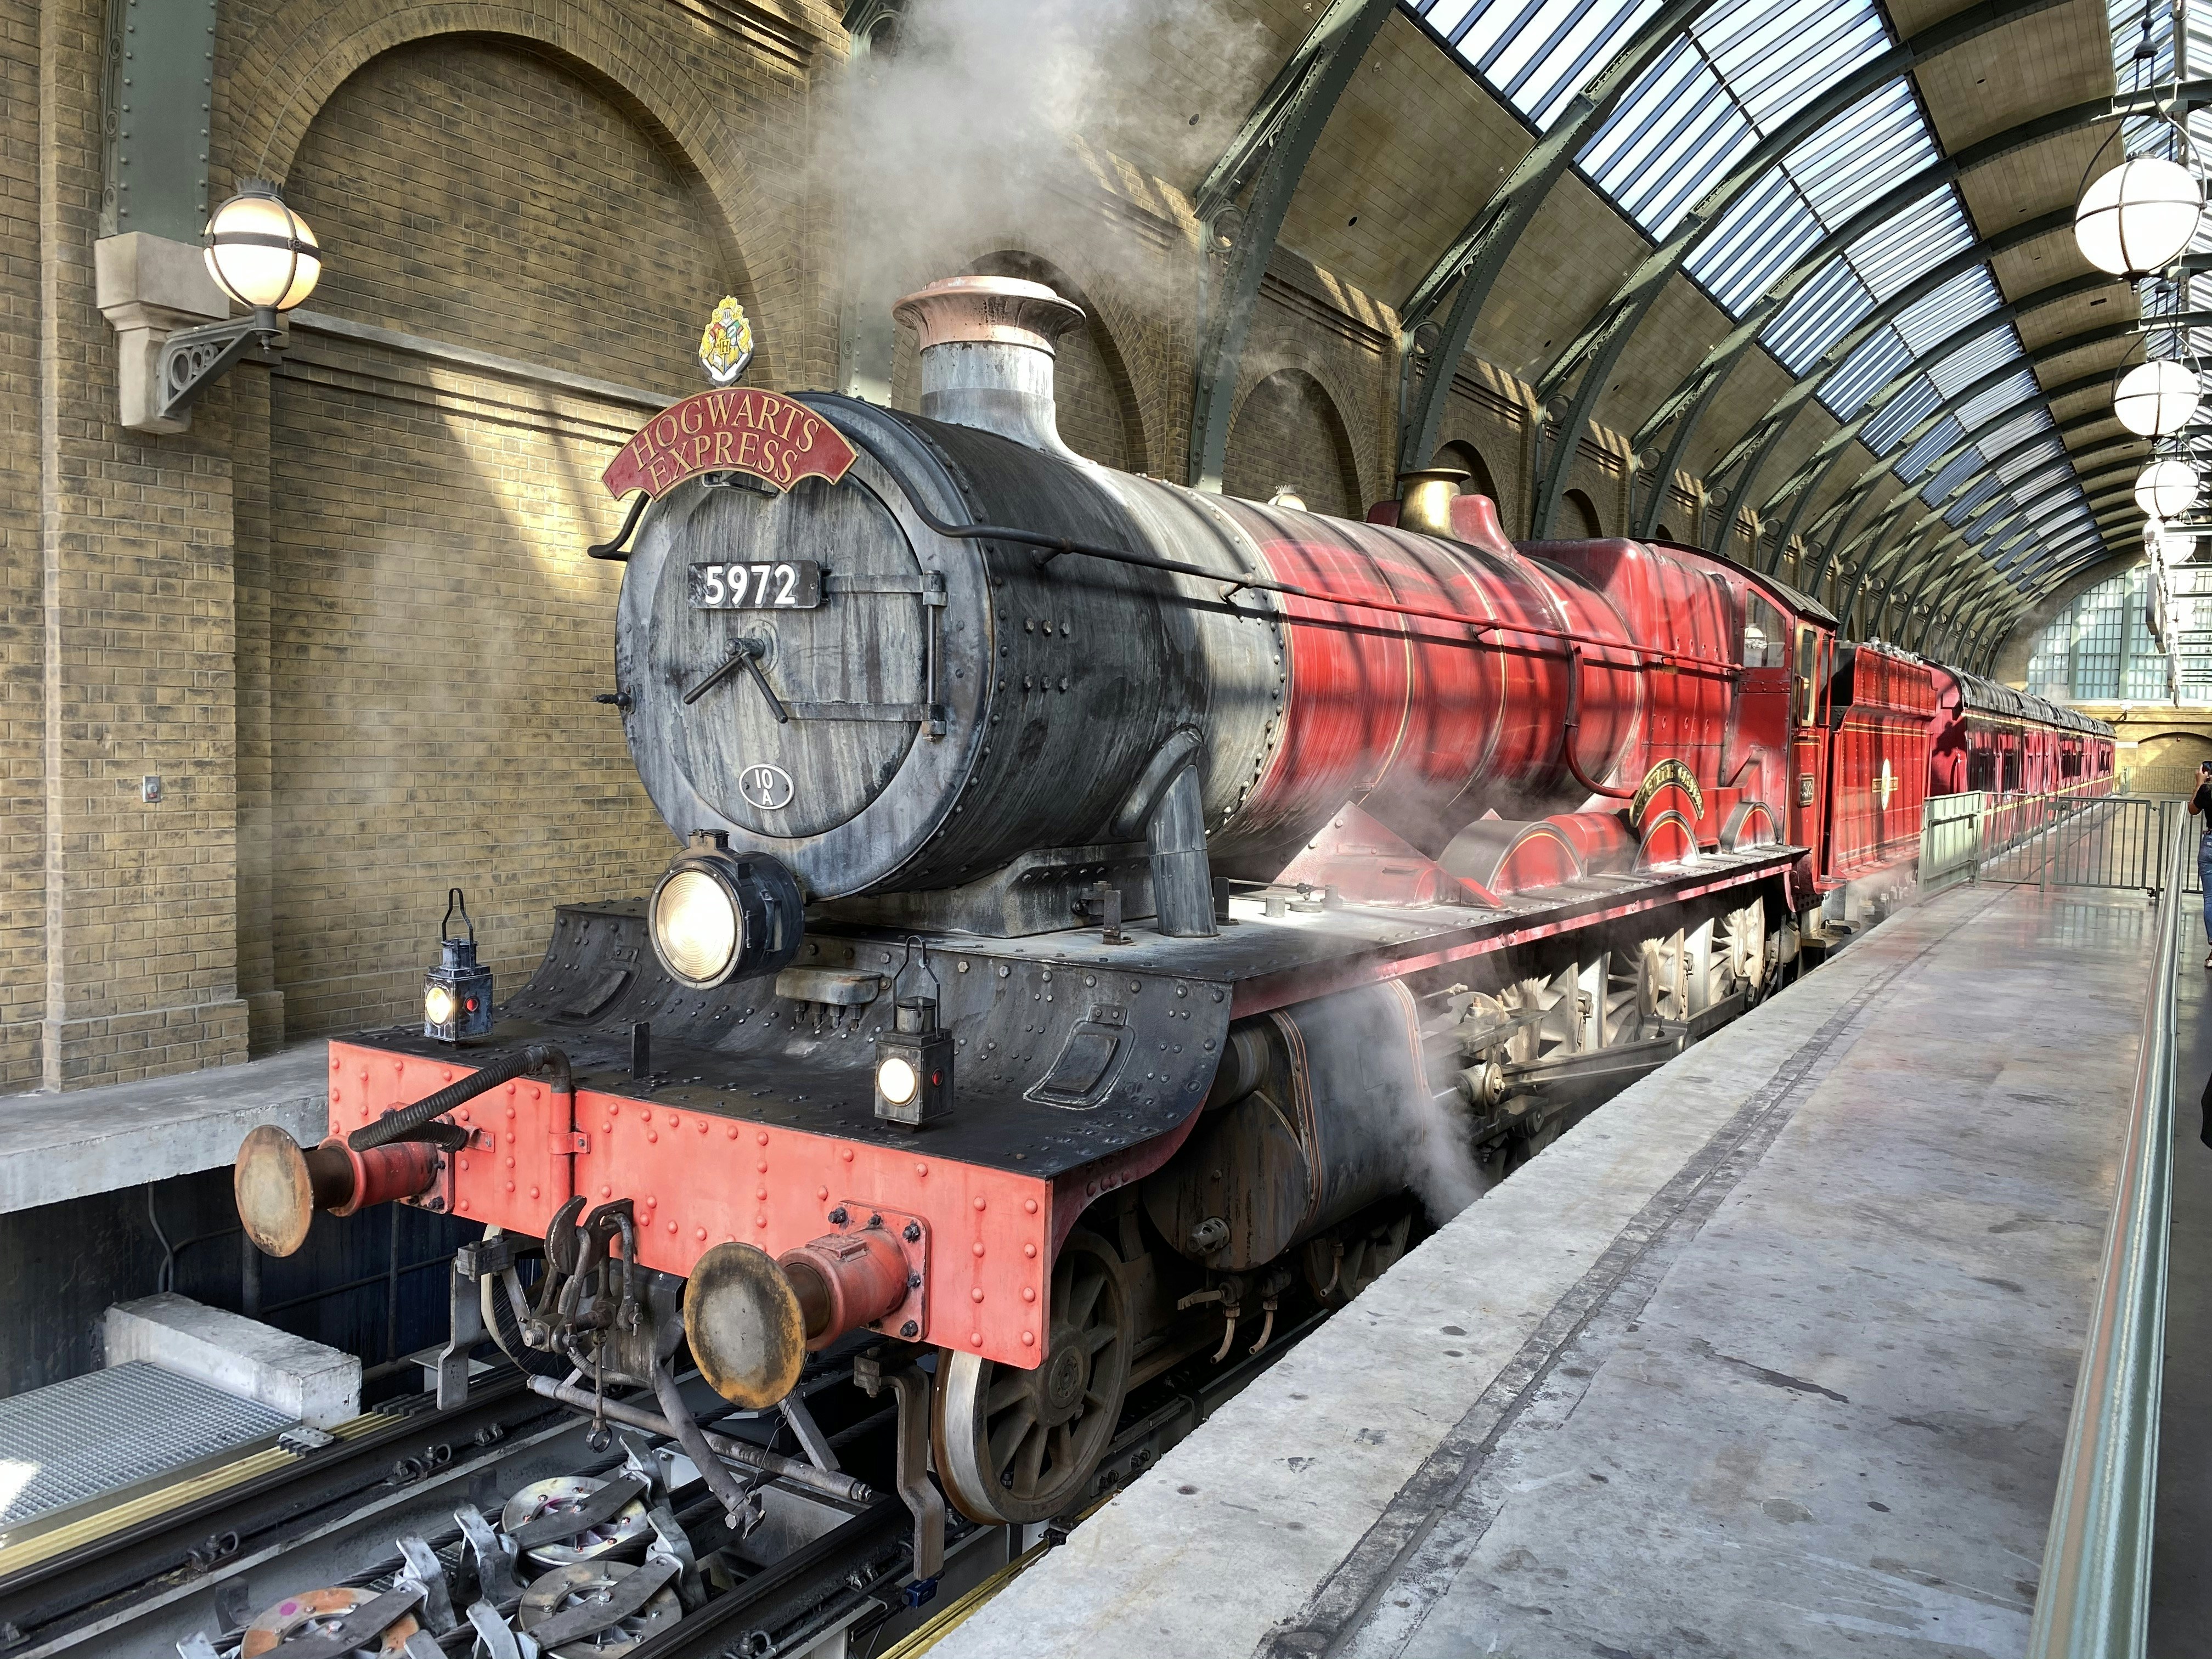 Hogwarts Express, the train in Harry Potter's world